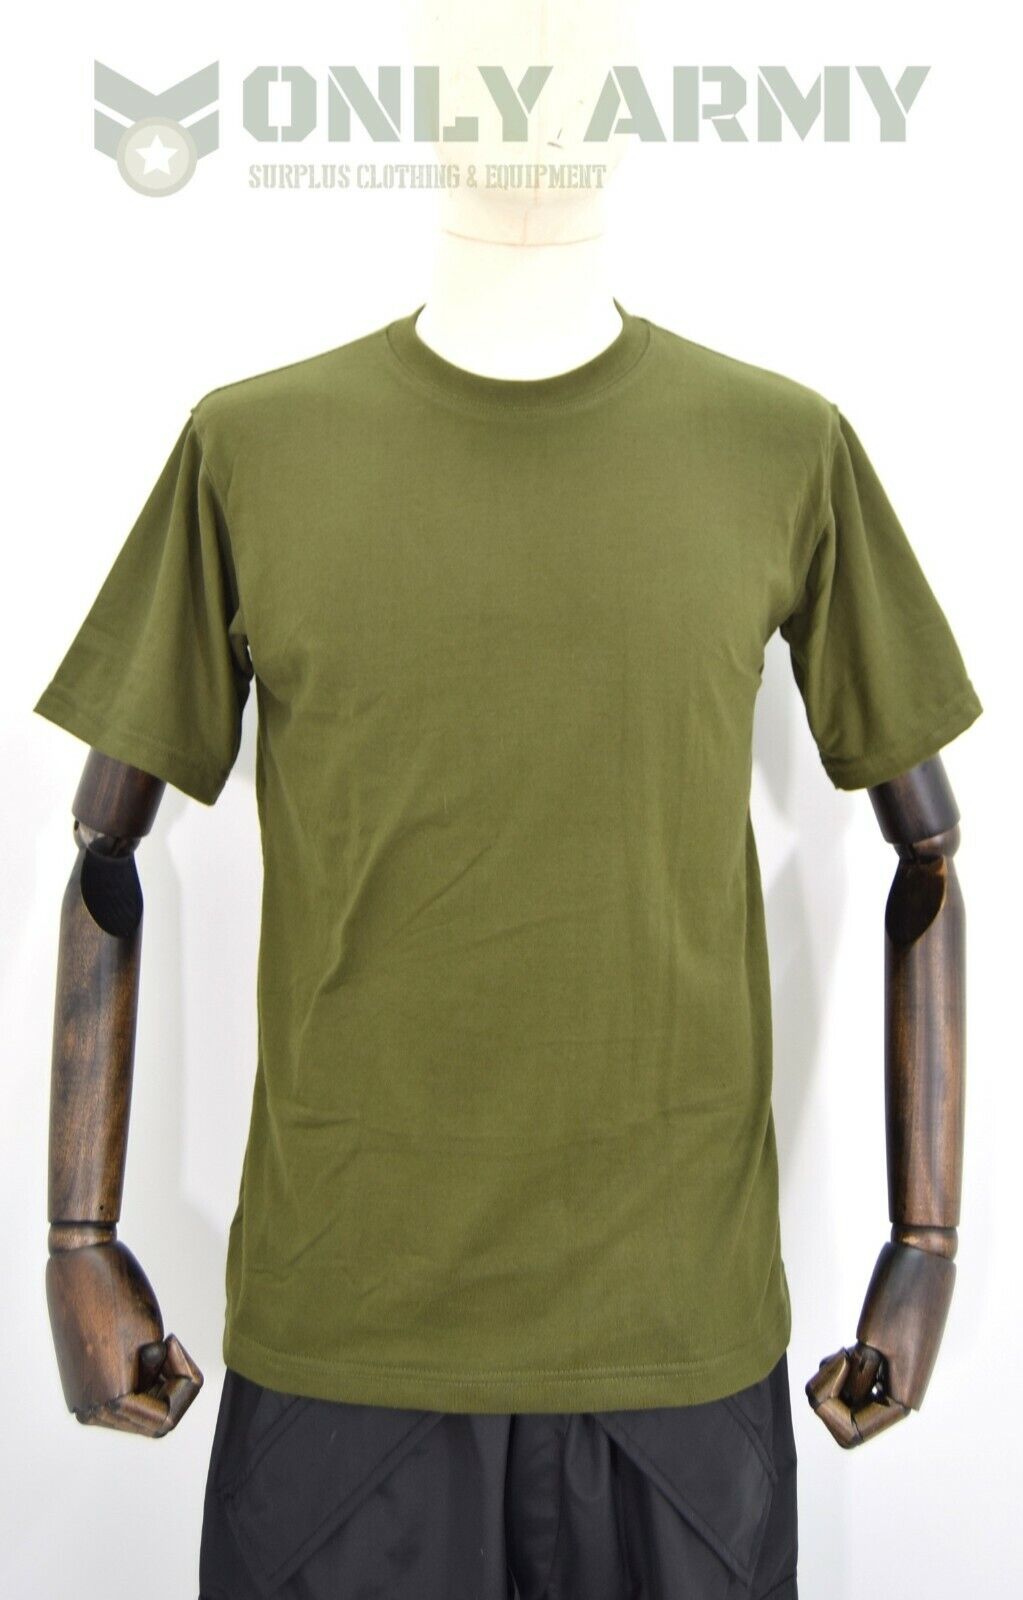 NEW British Army S95 Olive Green Tshirt Short Sleeve 100% Cotton OD Soldier 95 